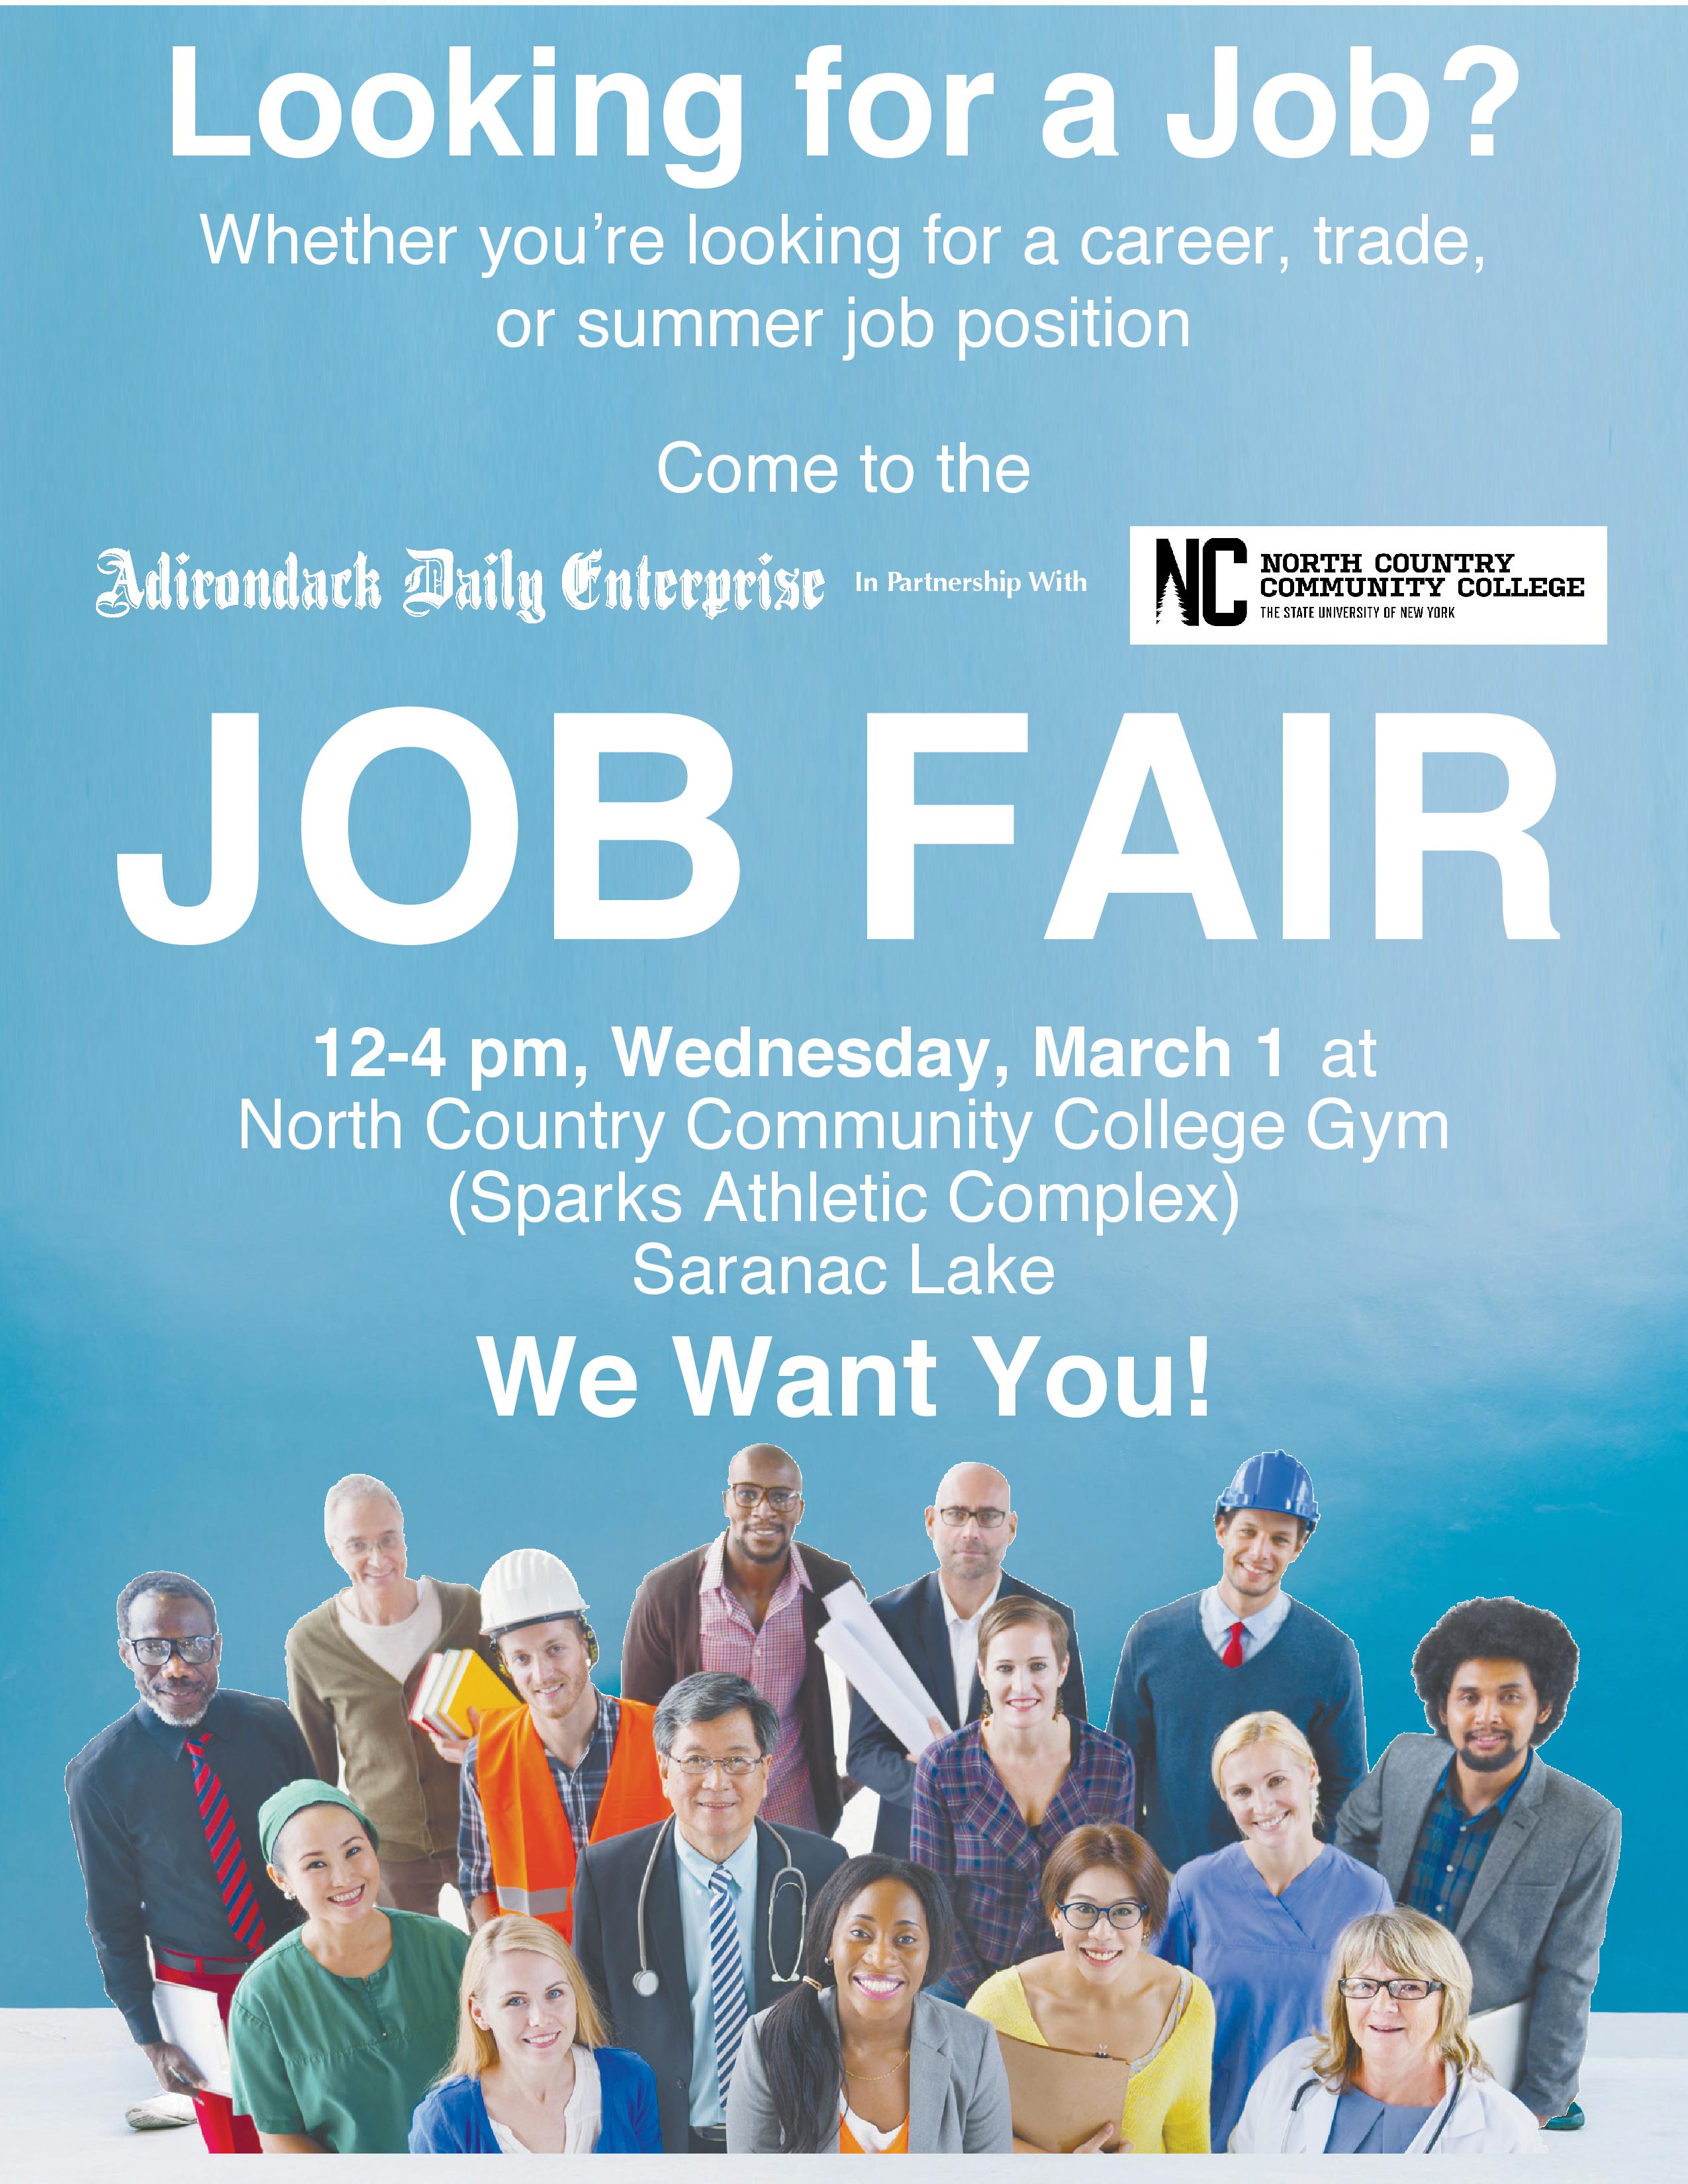 The Adirondack Daily Enterprise and Lake Placid News in partnership with North Country Community College will host the largest job fair in the North Country on Wednesday, March 1.  